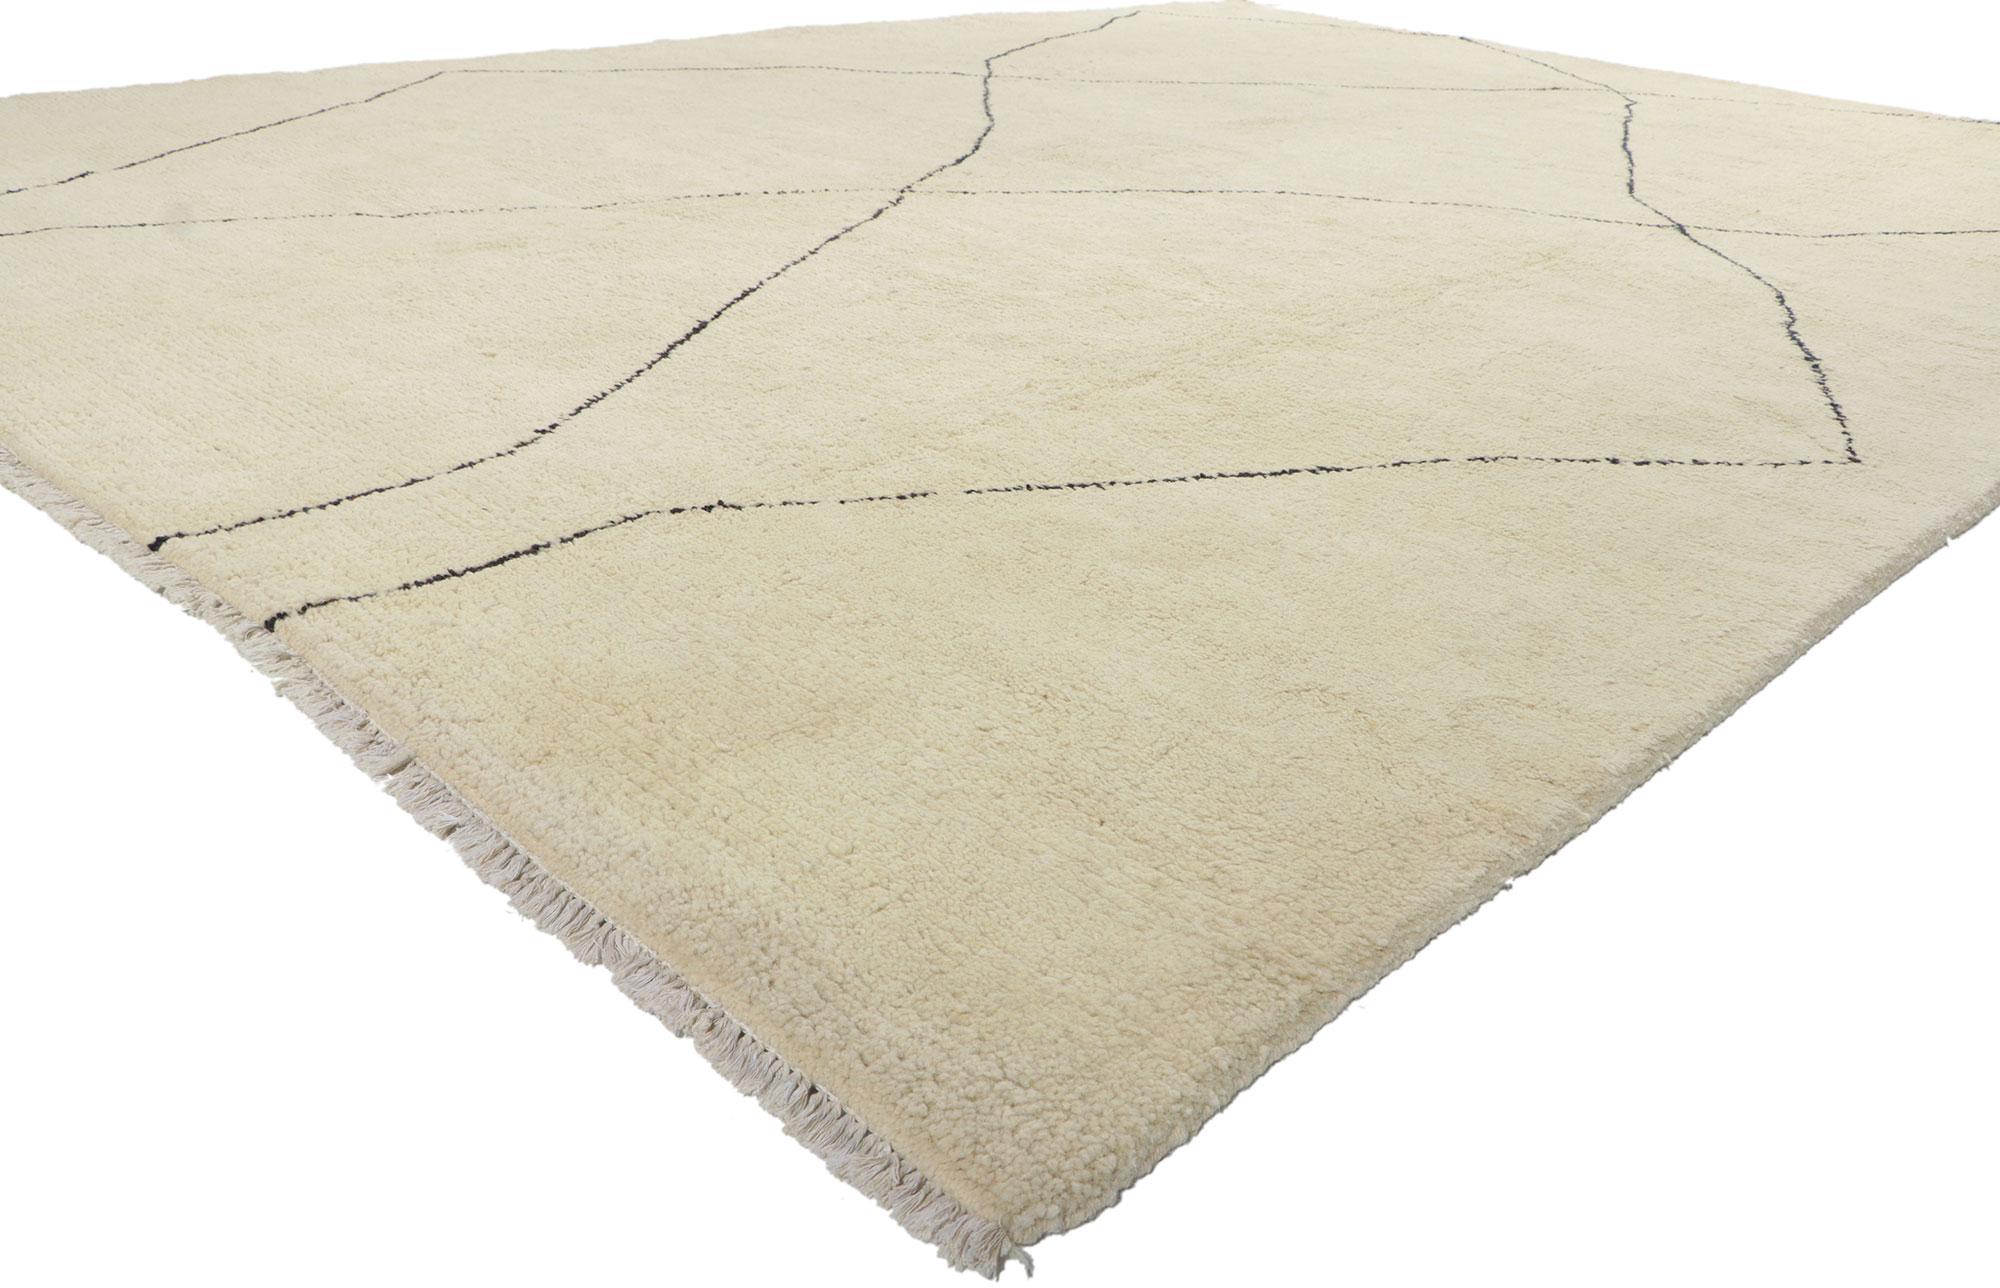 80577 New Modern Moroccan Area Rug, 10'01 x 13'09.
Emanating modern style with a plush pile, this hand knotted wool Moroccan style rug is a captivating vision of woven beauty. The simplistic design and neutral colorway woven into this piece work